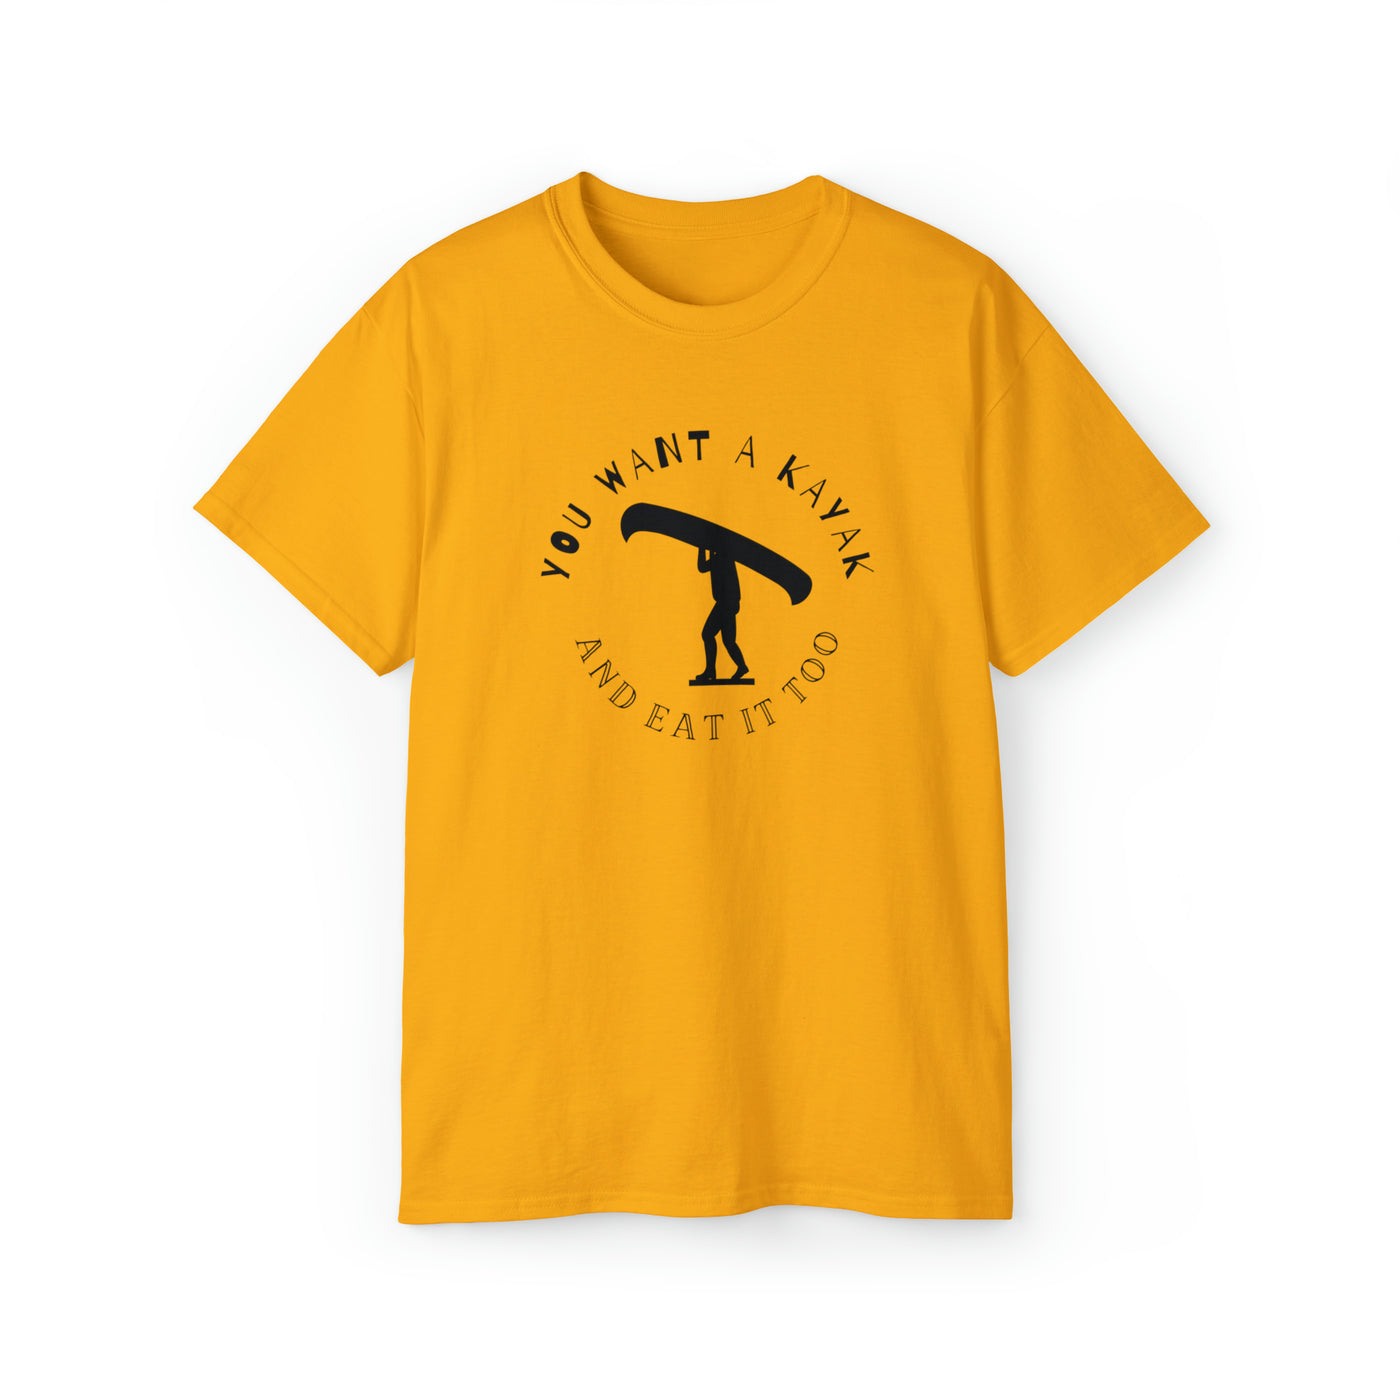 Want a kayak and eat it too Unisex Ultra Cotton Tee